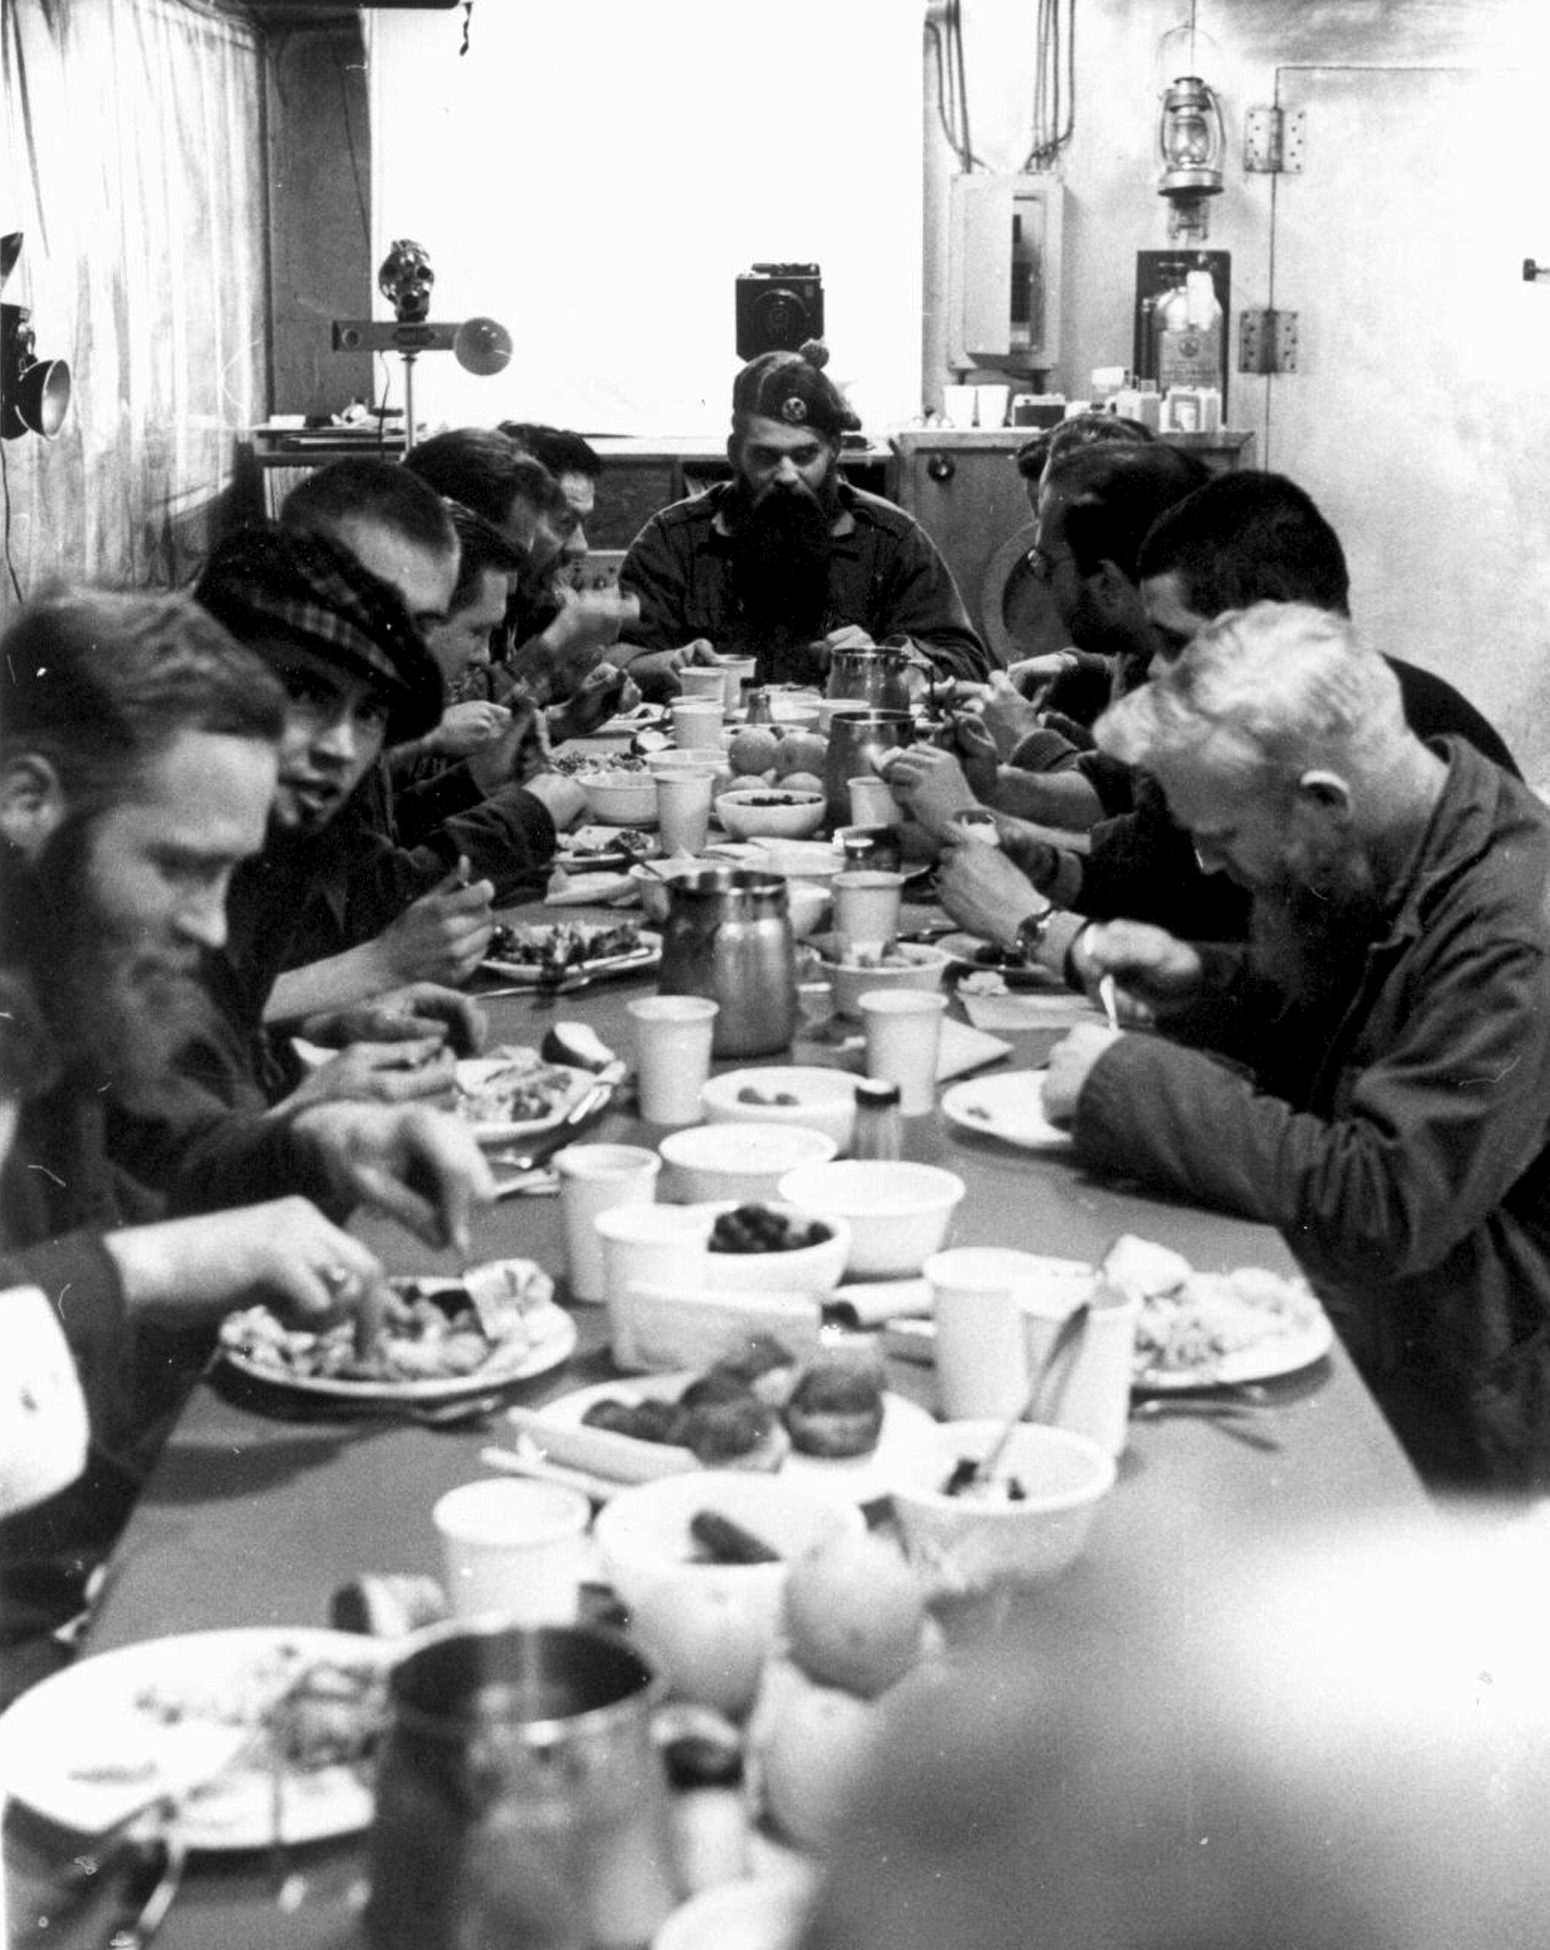 Men eat a meal at a long table.